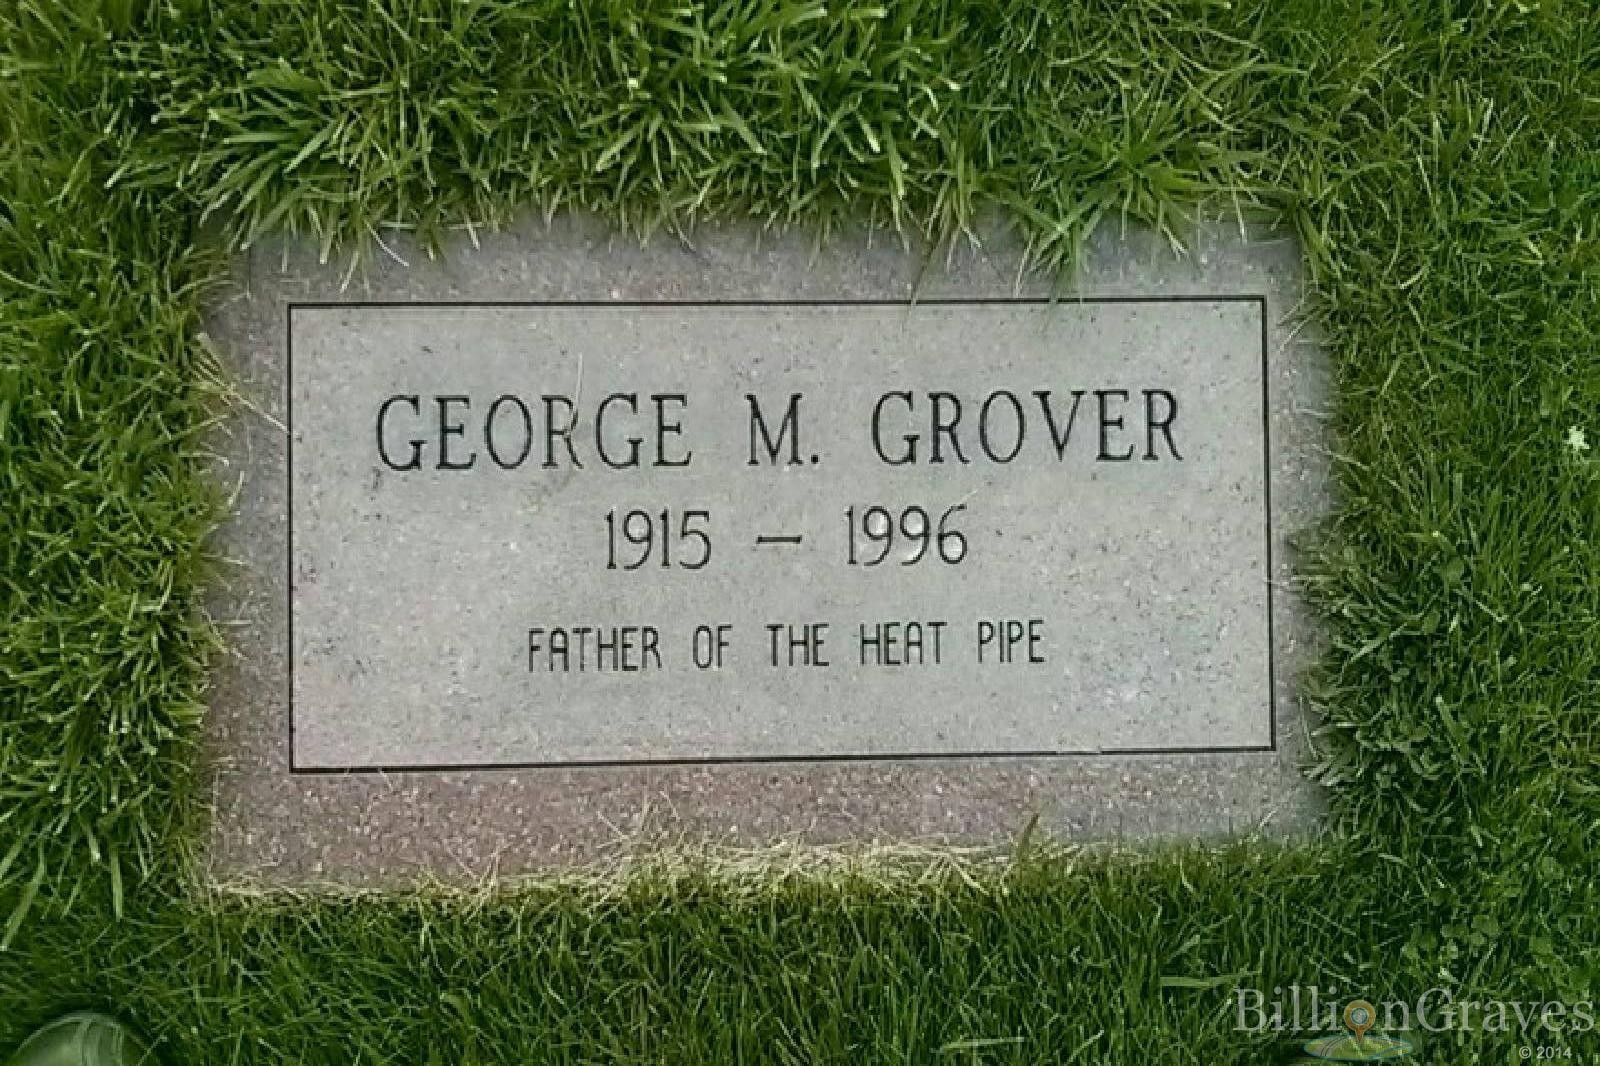 George M. Grover, Father of the Heat Pipe